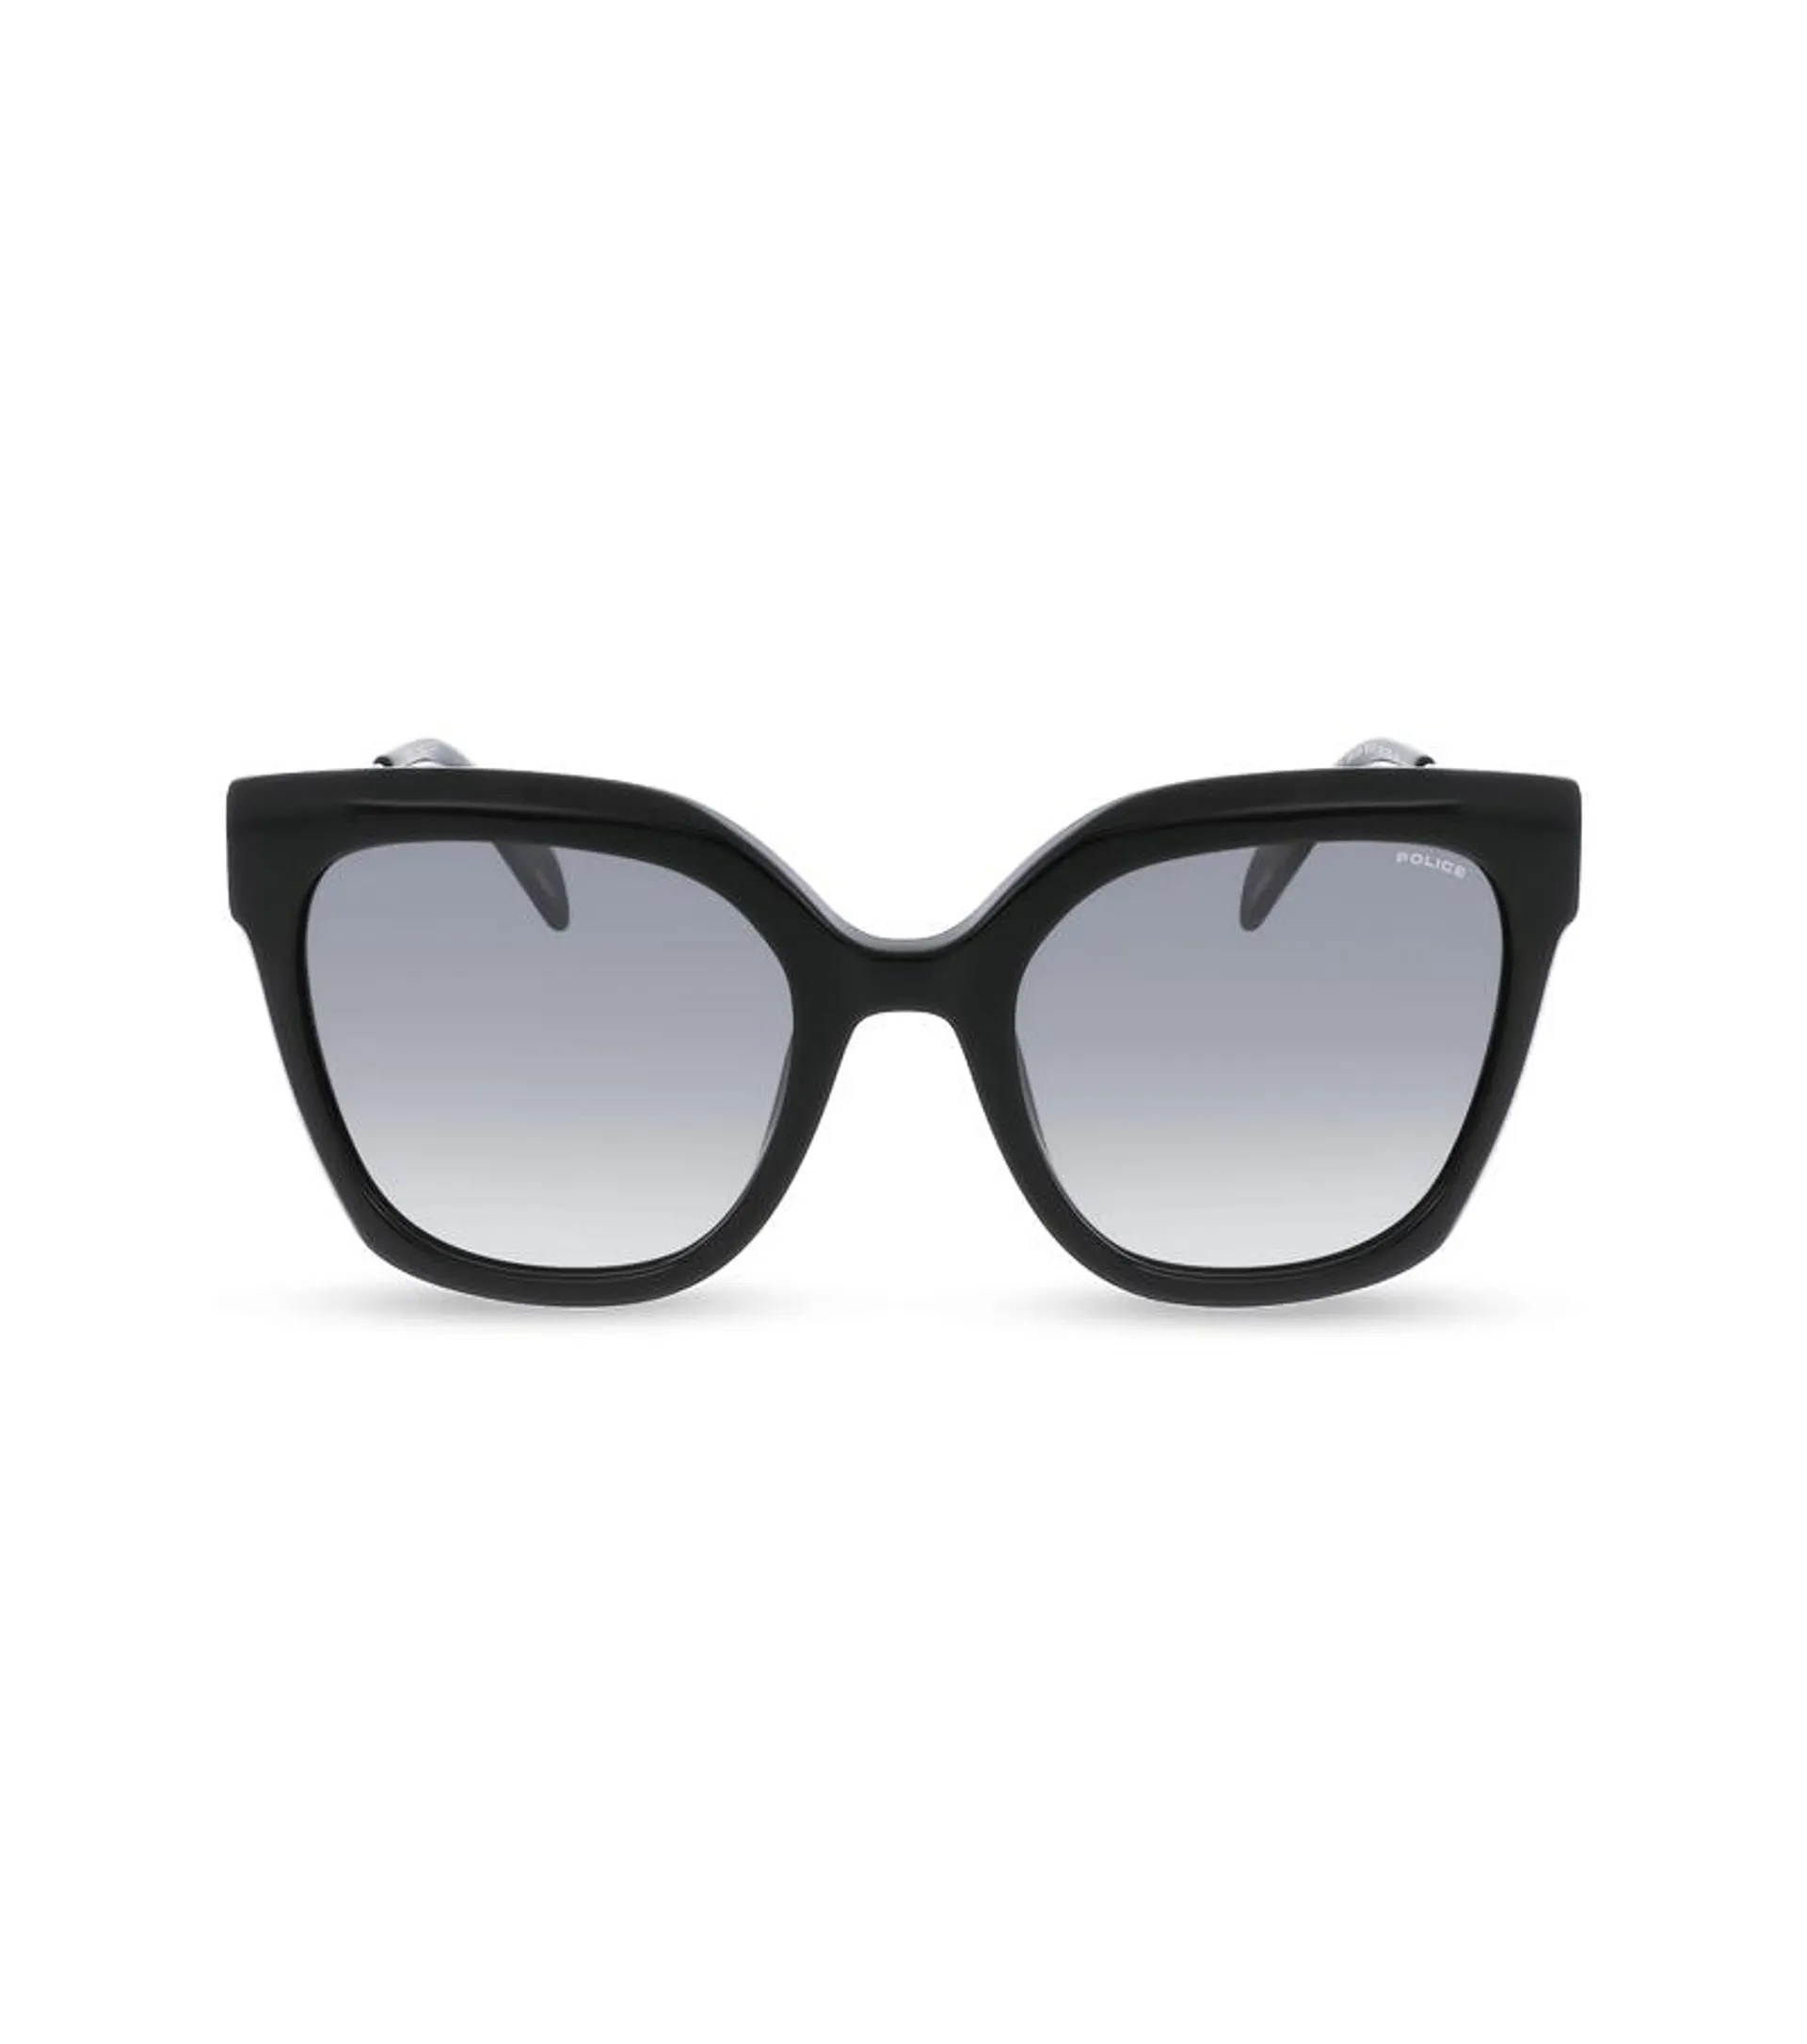 Fame 1 Woman Sunglasses Police SPLG19